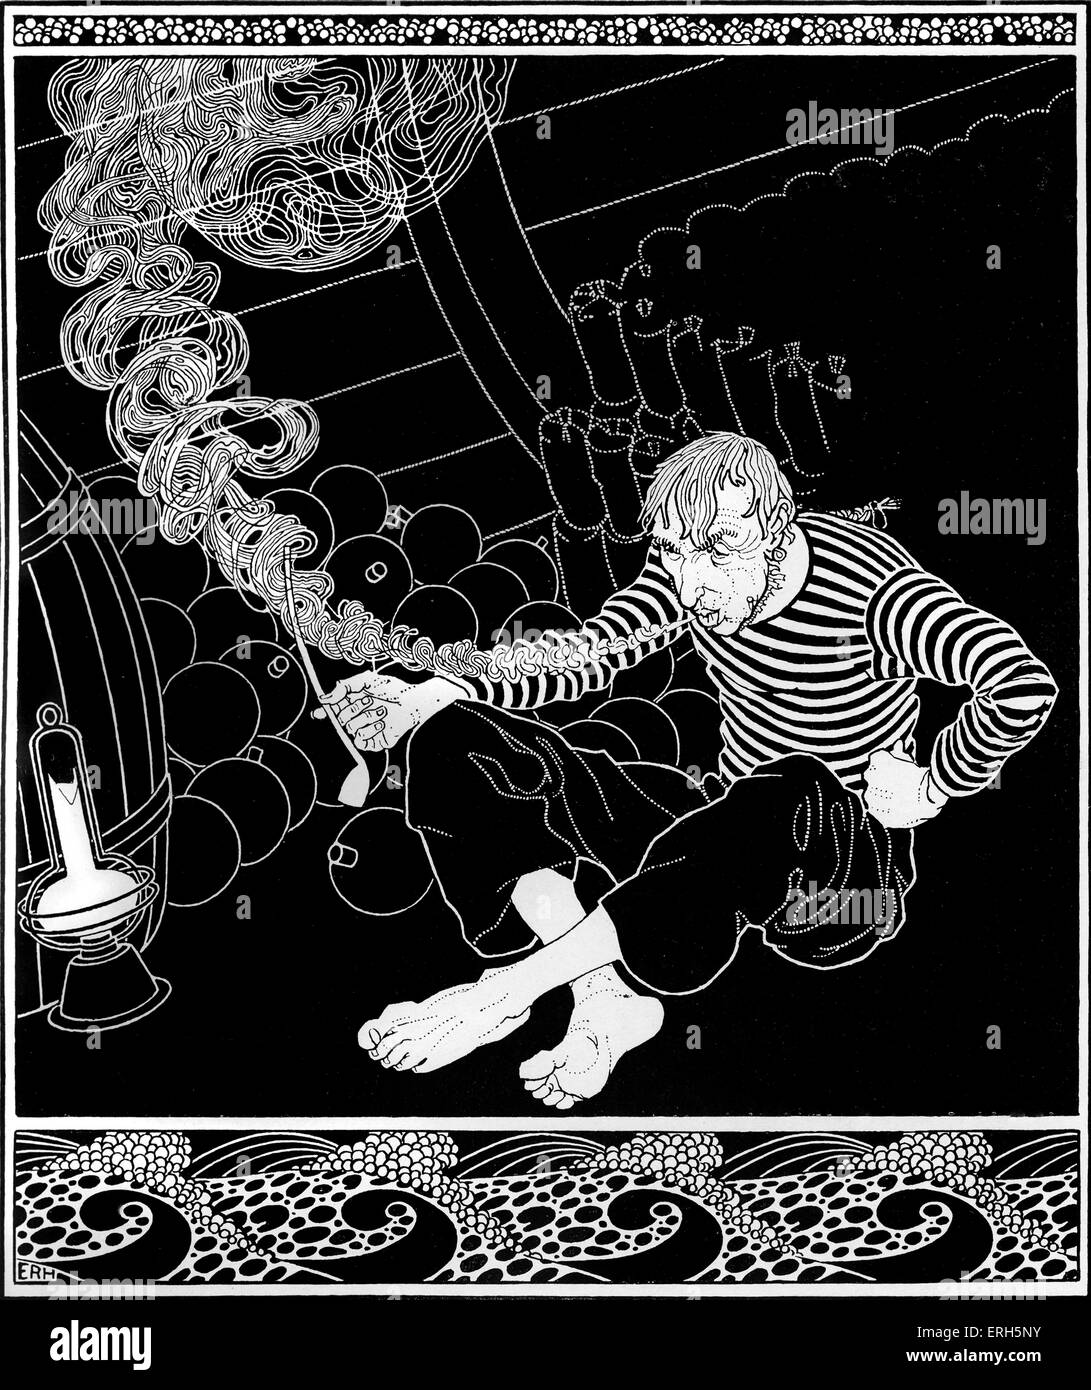 The Sinking Ship by Robert Louis Stevenson, illustration by E. R. Herman (dates unknown). From  'Fables' by RL Stevenson, Stock Photo